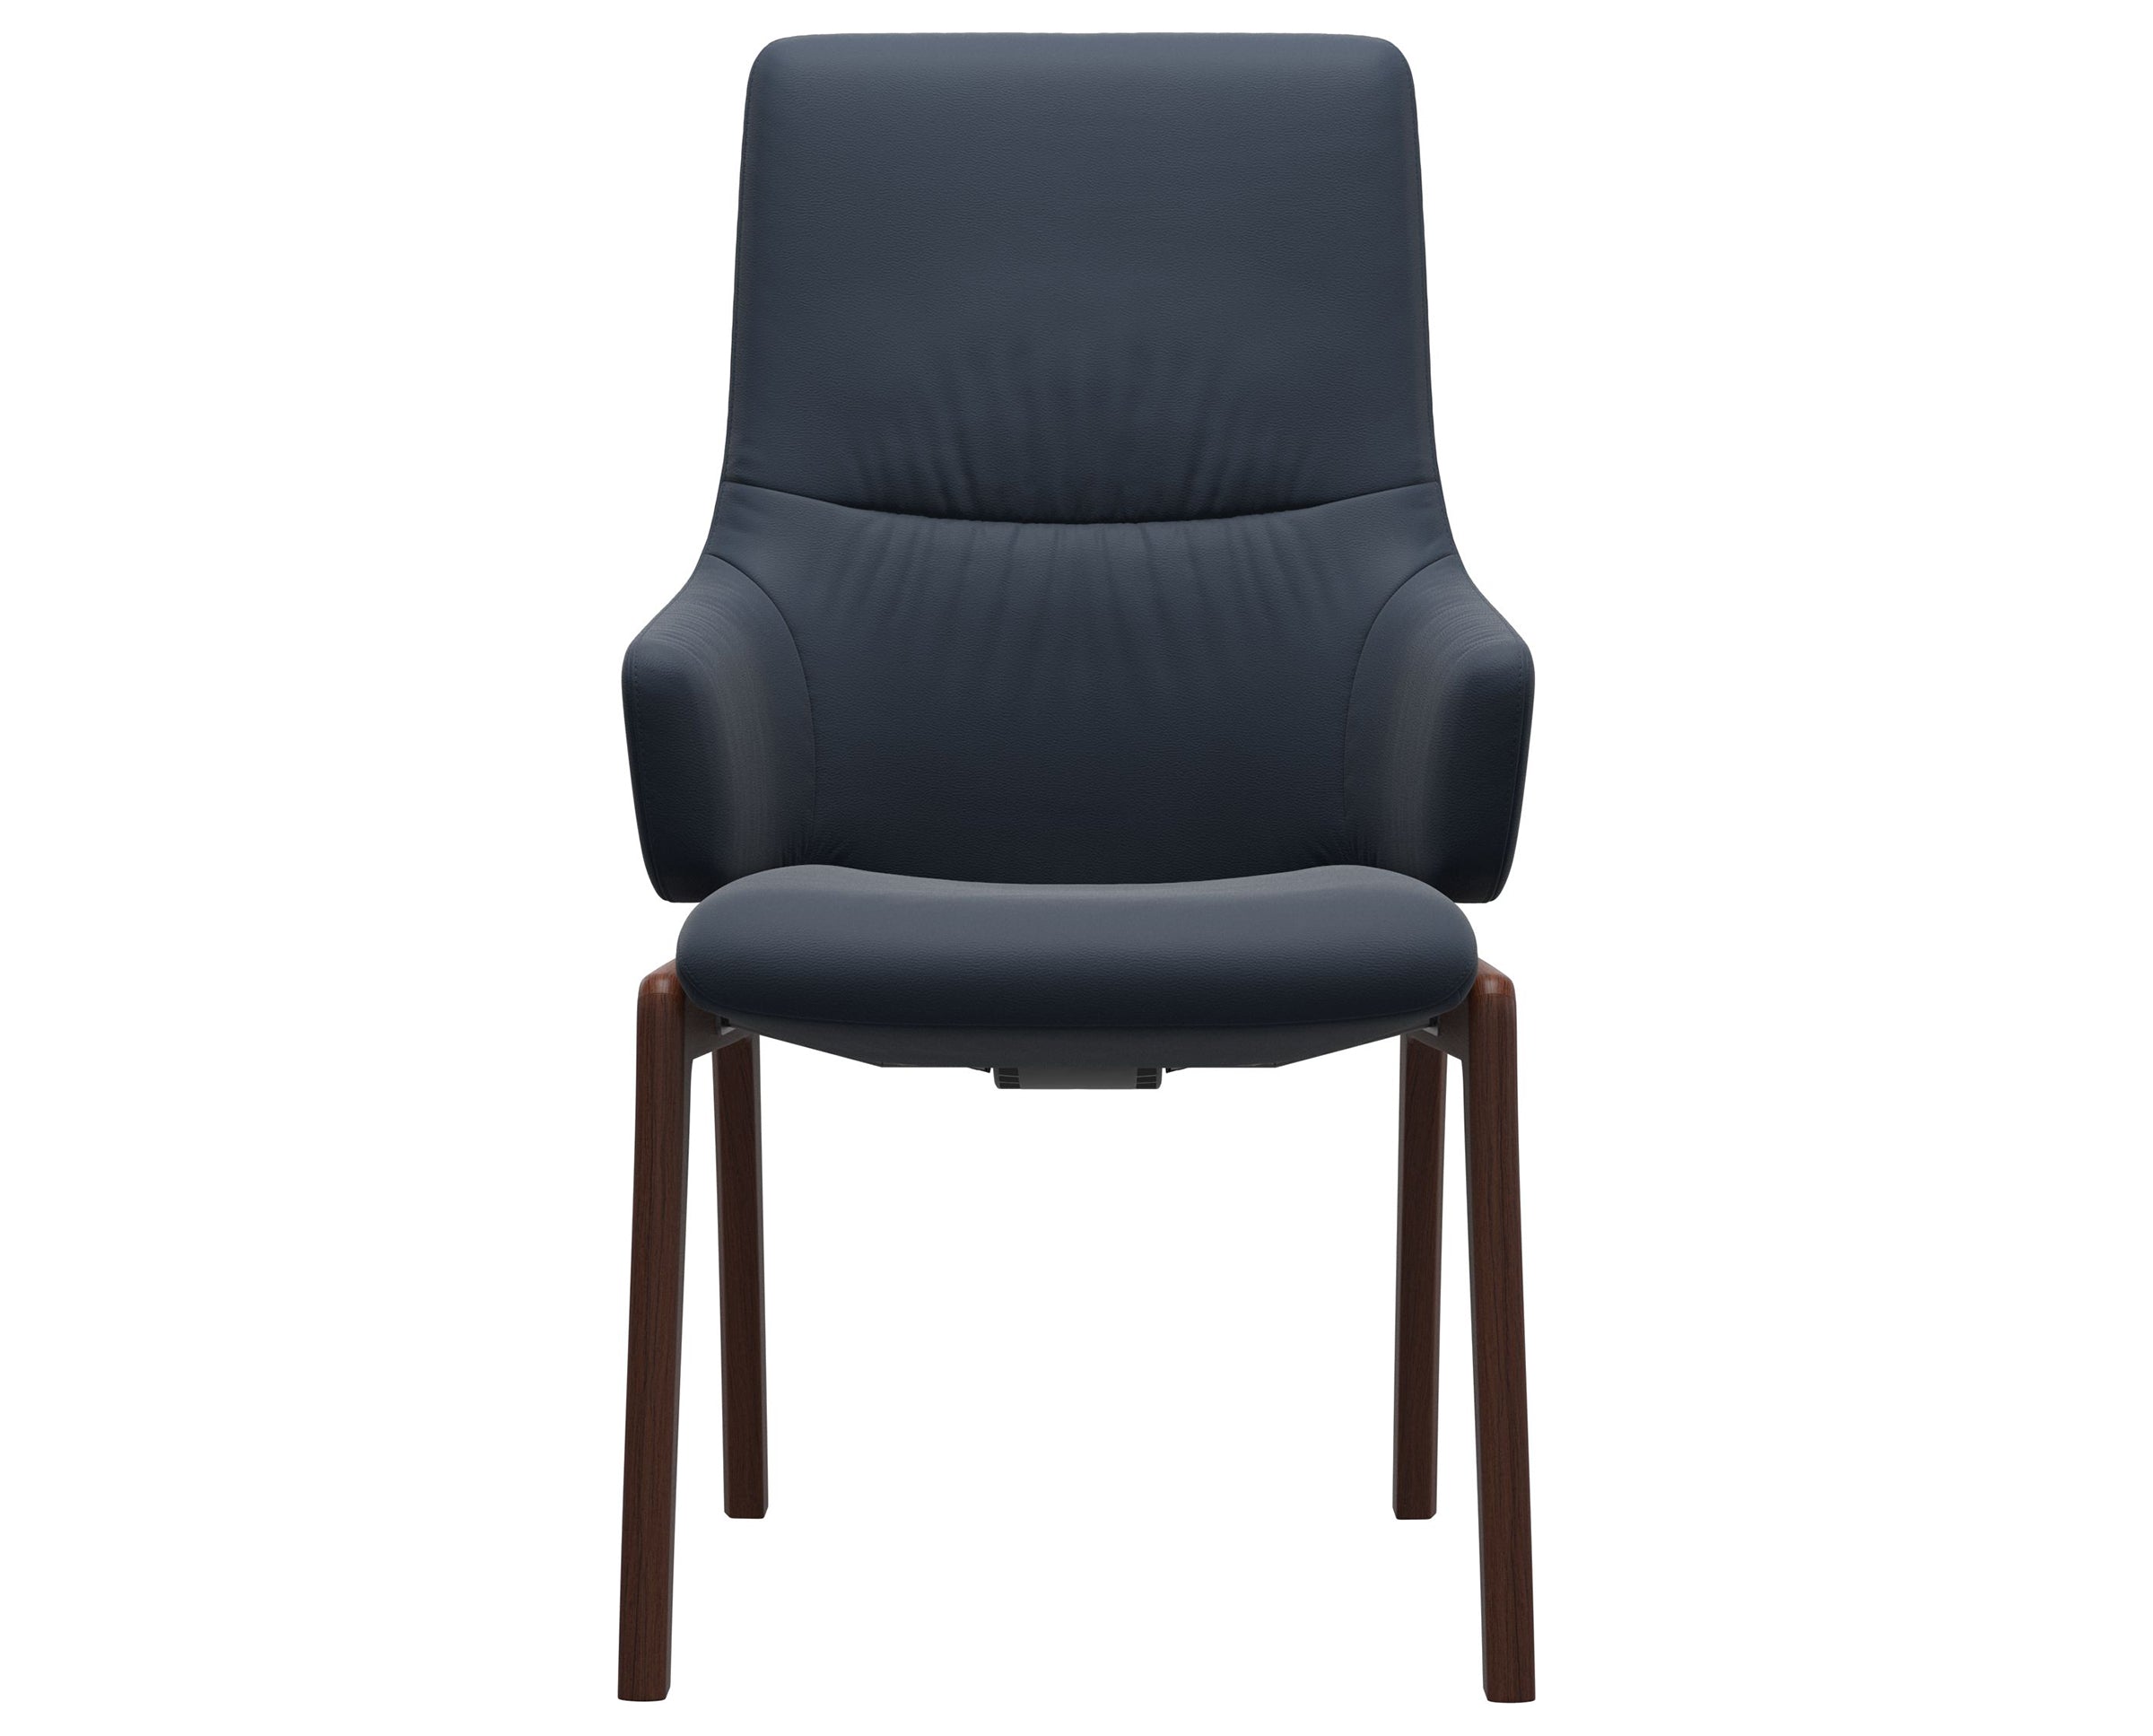 Paloma Leather Oxford Blue and Walnut Base | Stressless Mint High Back D100 Dining Chair w/Arms | Valley Ridge Furniture